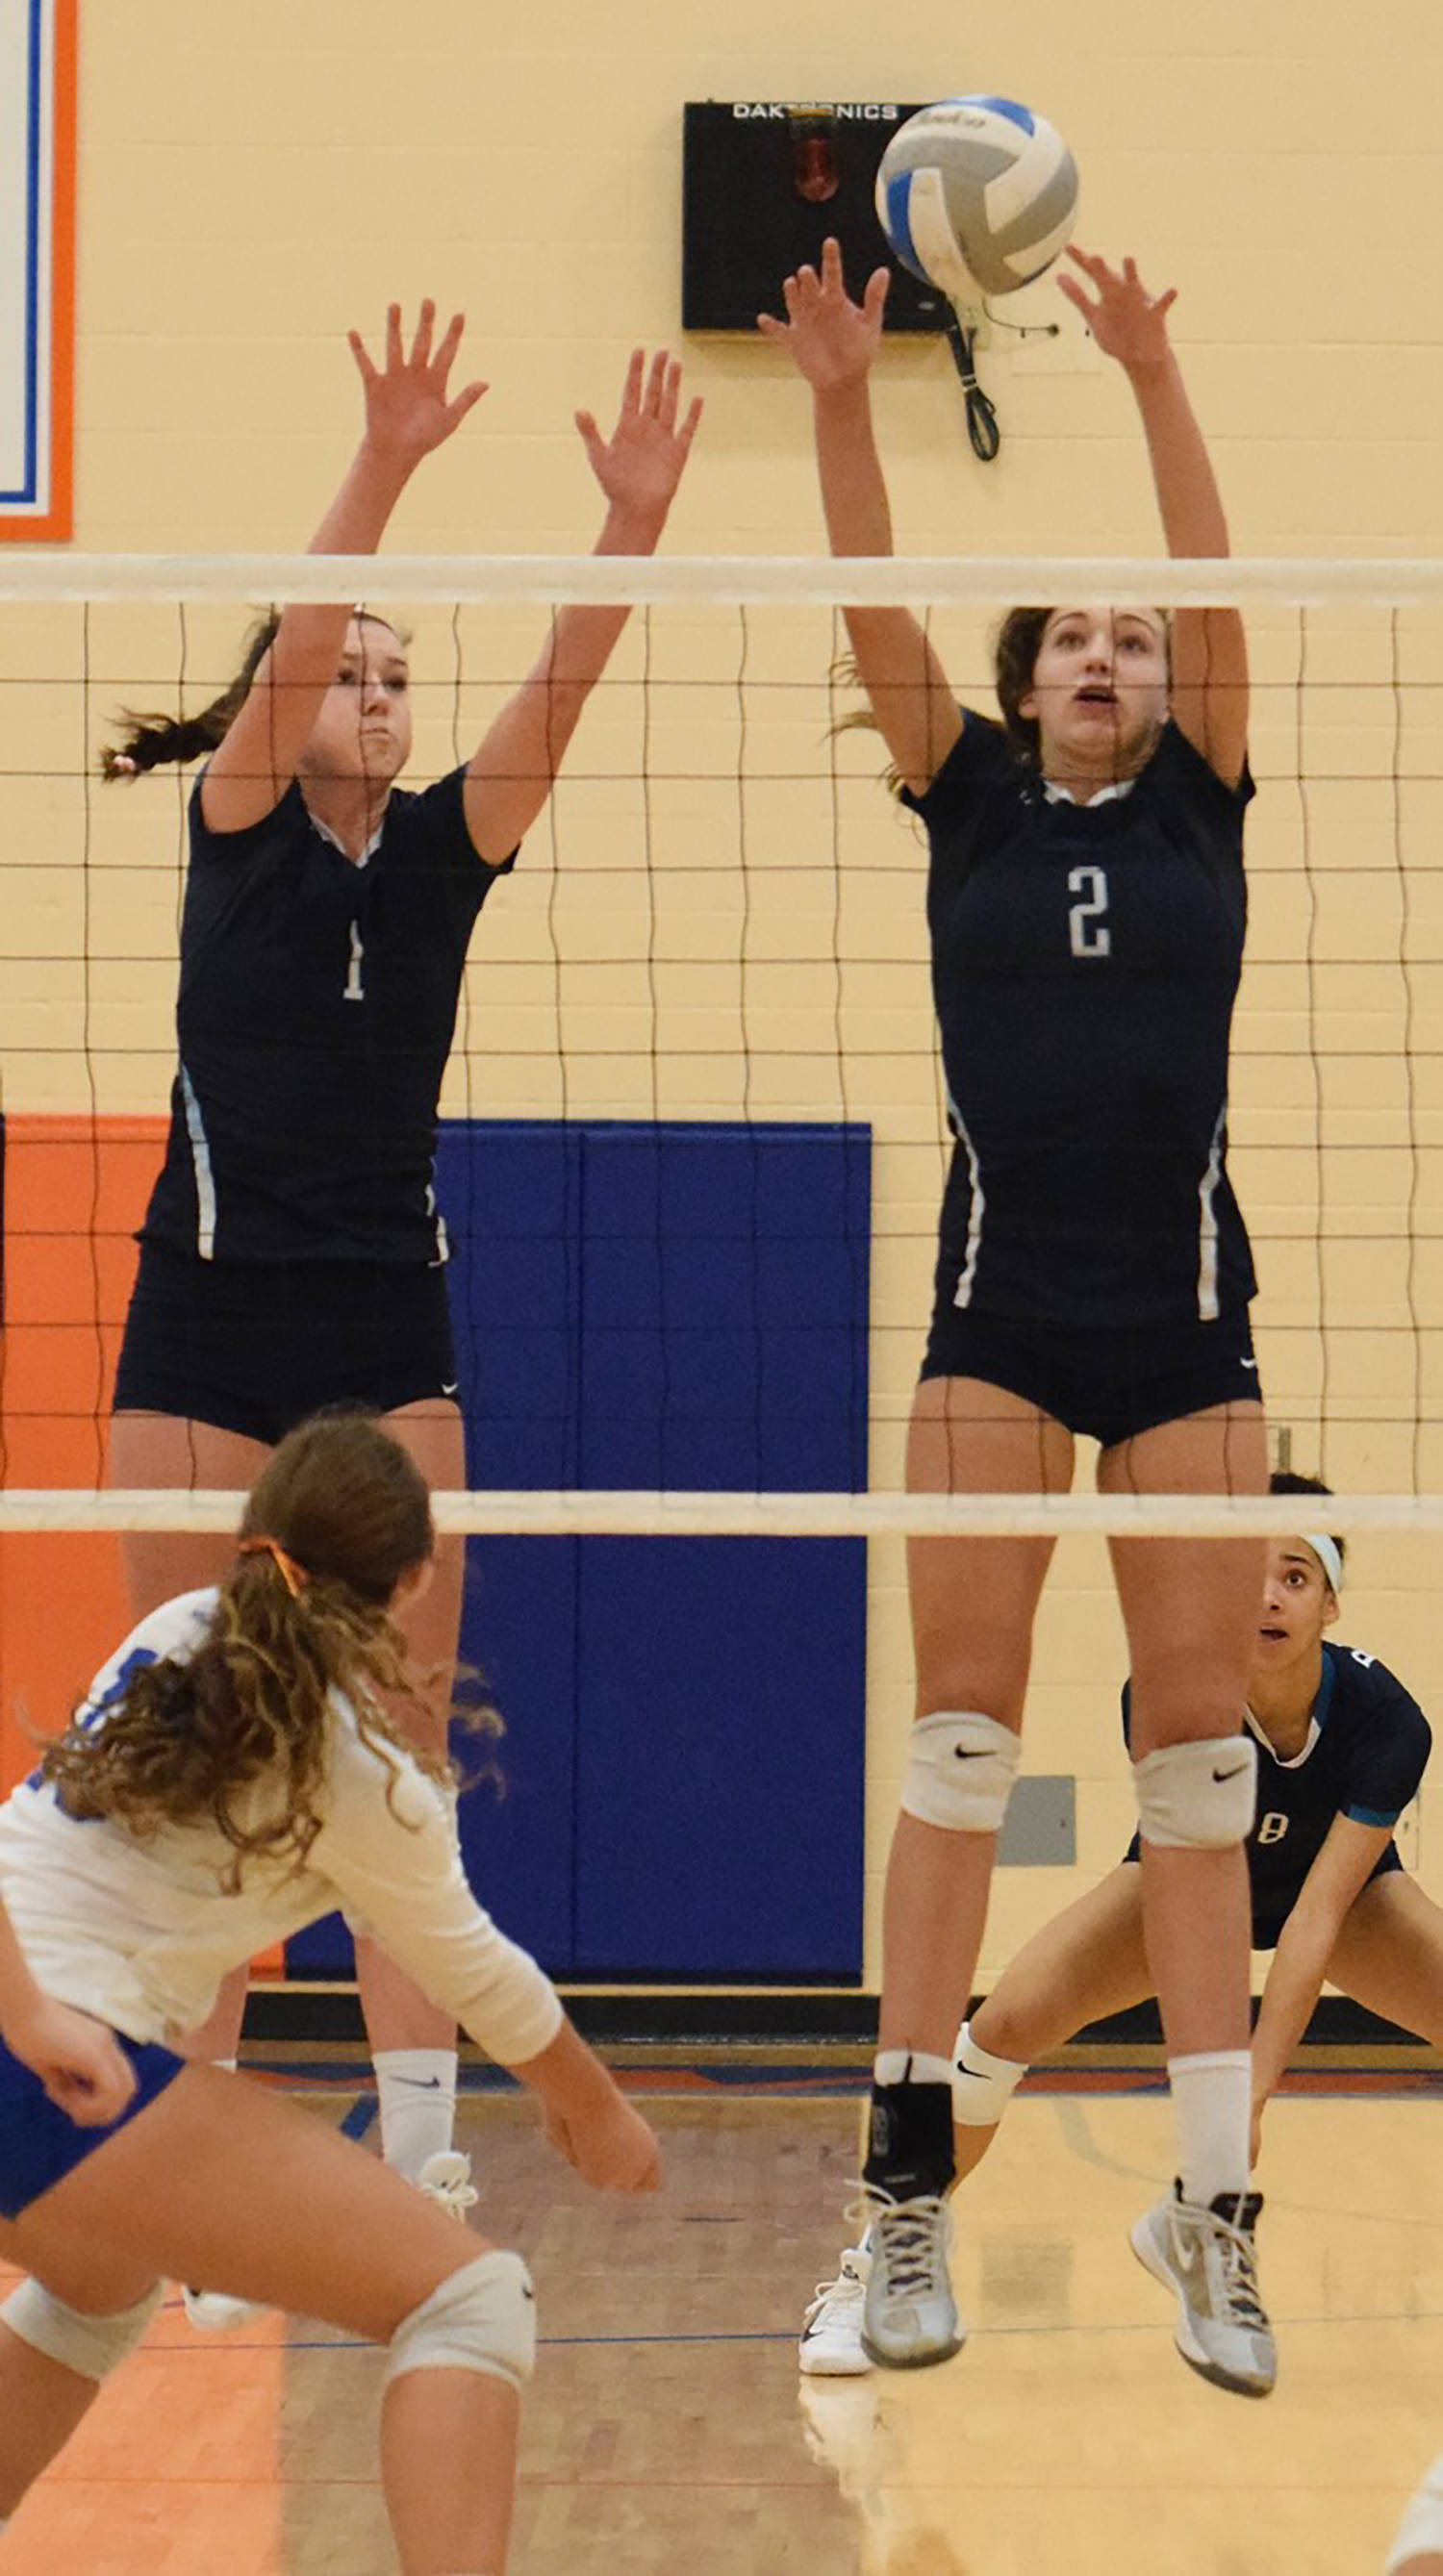 Auburn Riverside’s Anna Maracich, left, and Calley Heilborn apply a wall to block a shot during NPSL Olympic Division play against Auburn Mountainview on Monday night. RACHEL CIAMPI, Auburn Reporter